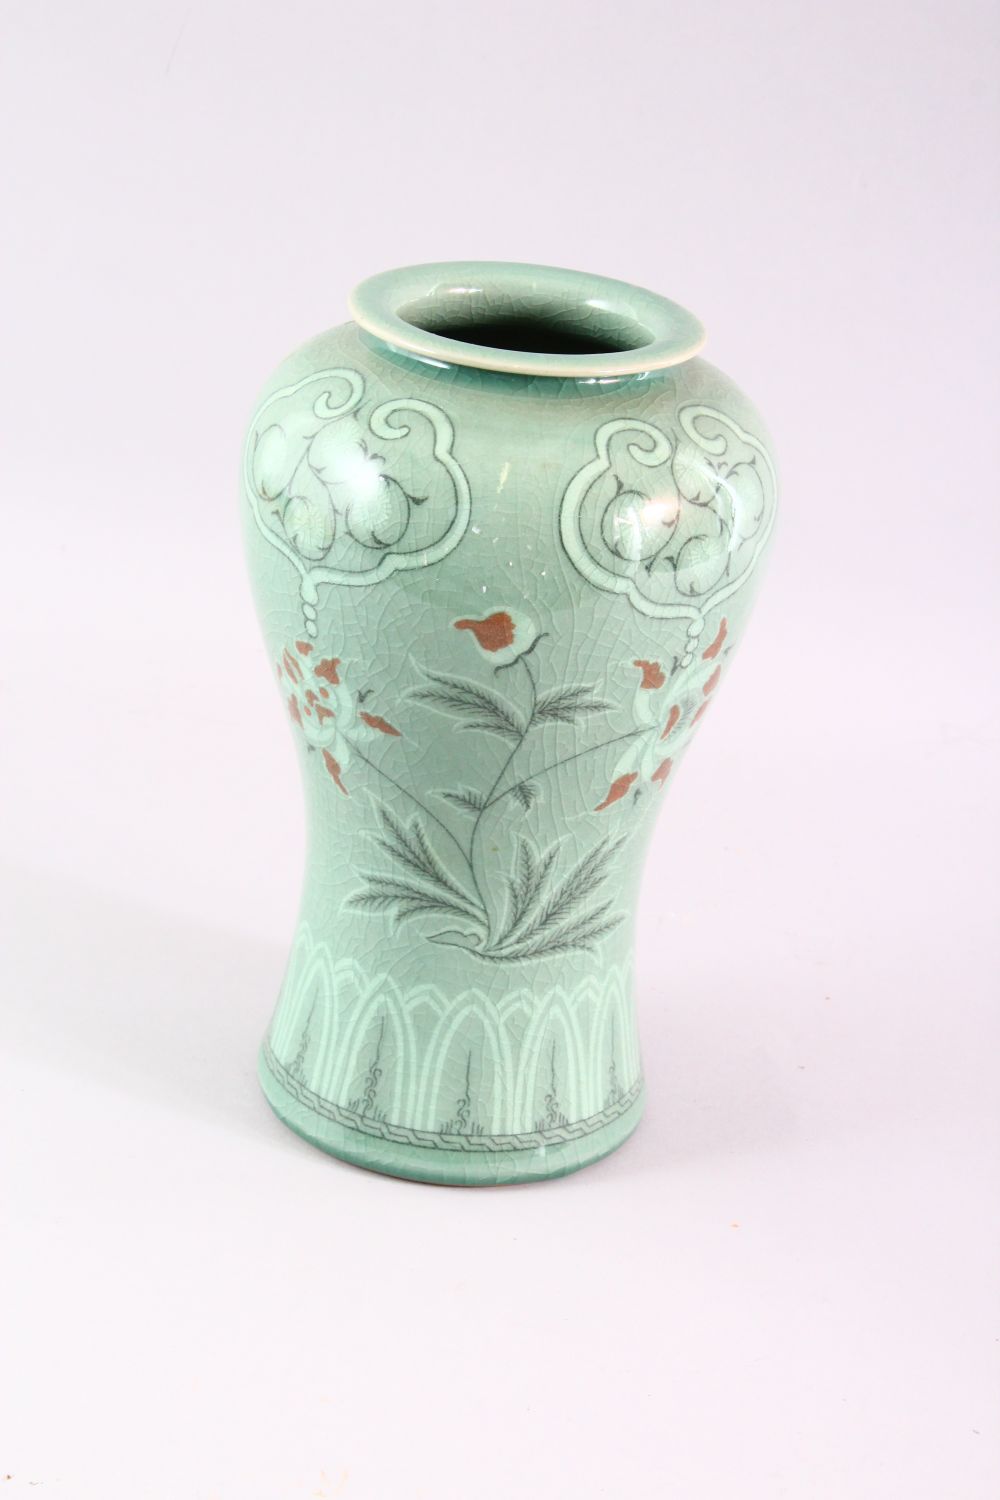 THREE 20TH CENTURY KOREAN CELADON PORCELAIN TEA SET, the body decorated with formal floral - Image 5 of 6